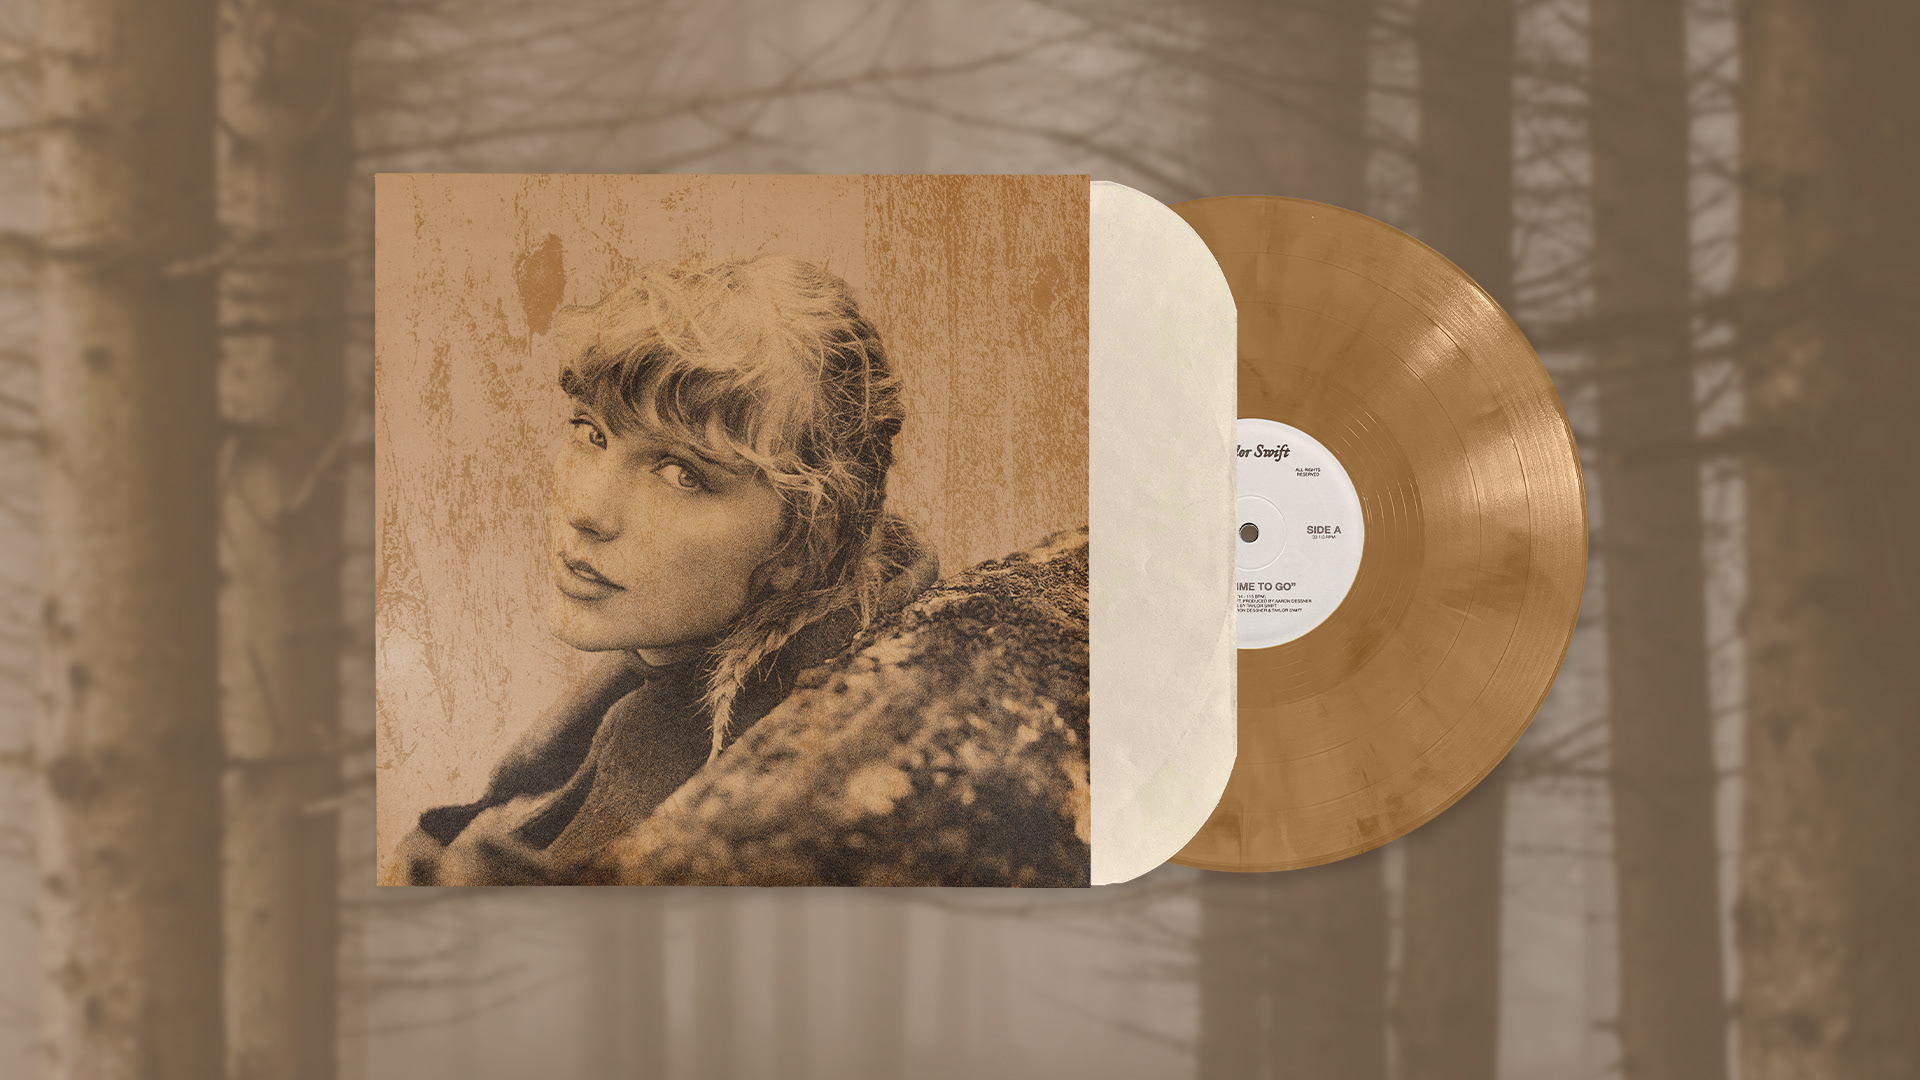 Zachary Cleek - Evermore by Taylor Swift Vinyl Record & Poster Concept